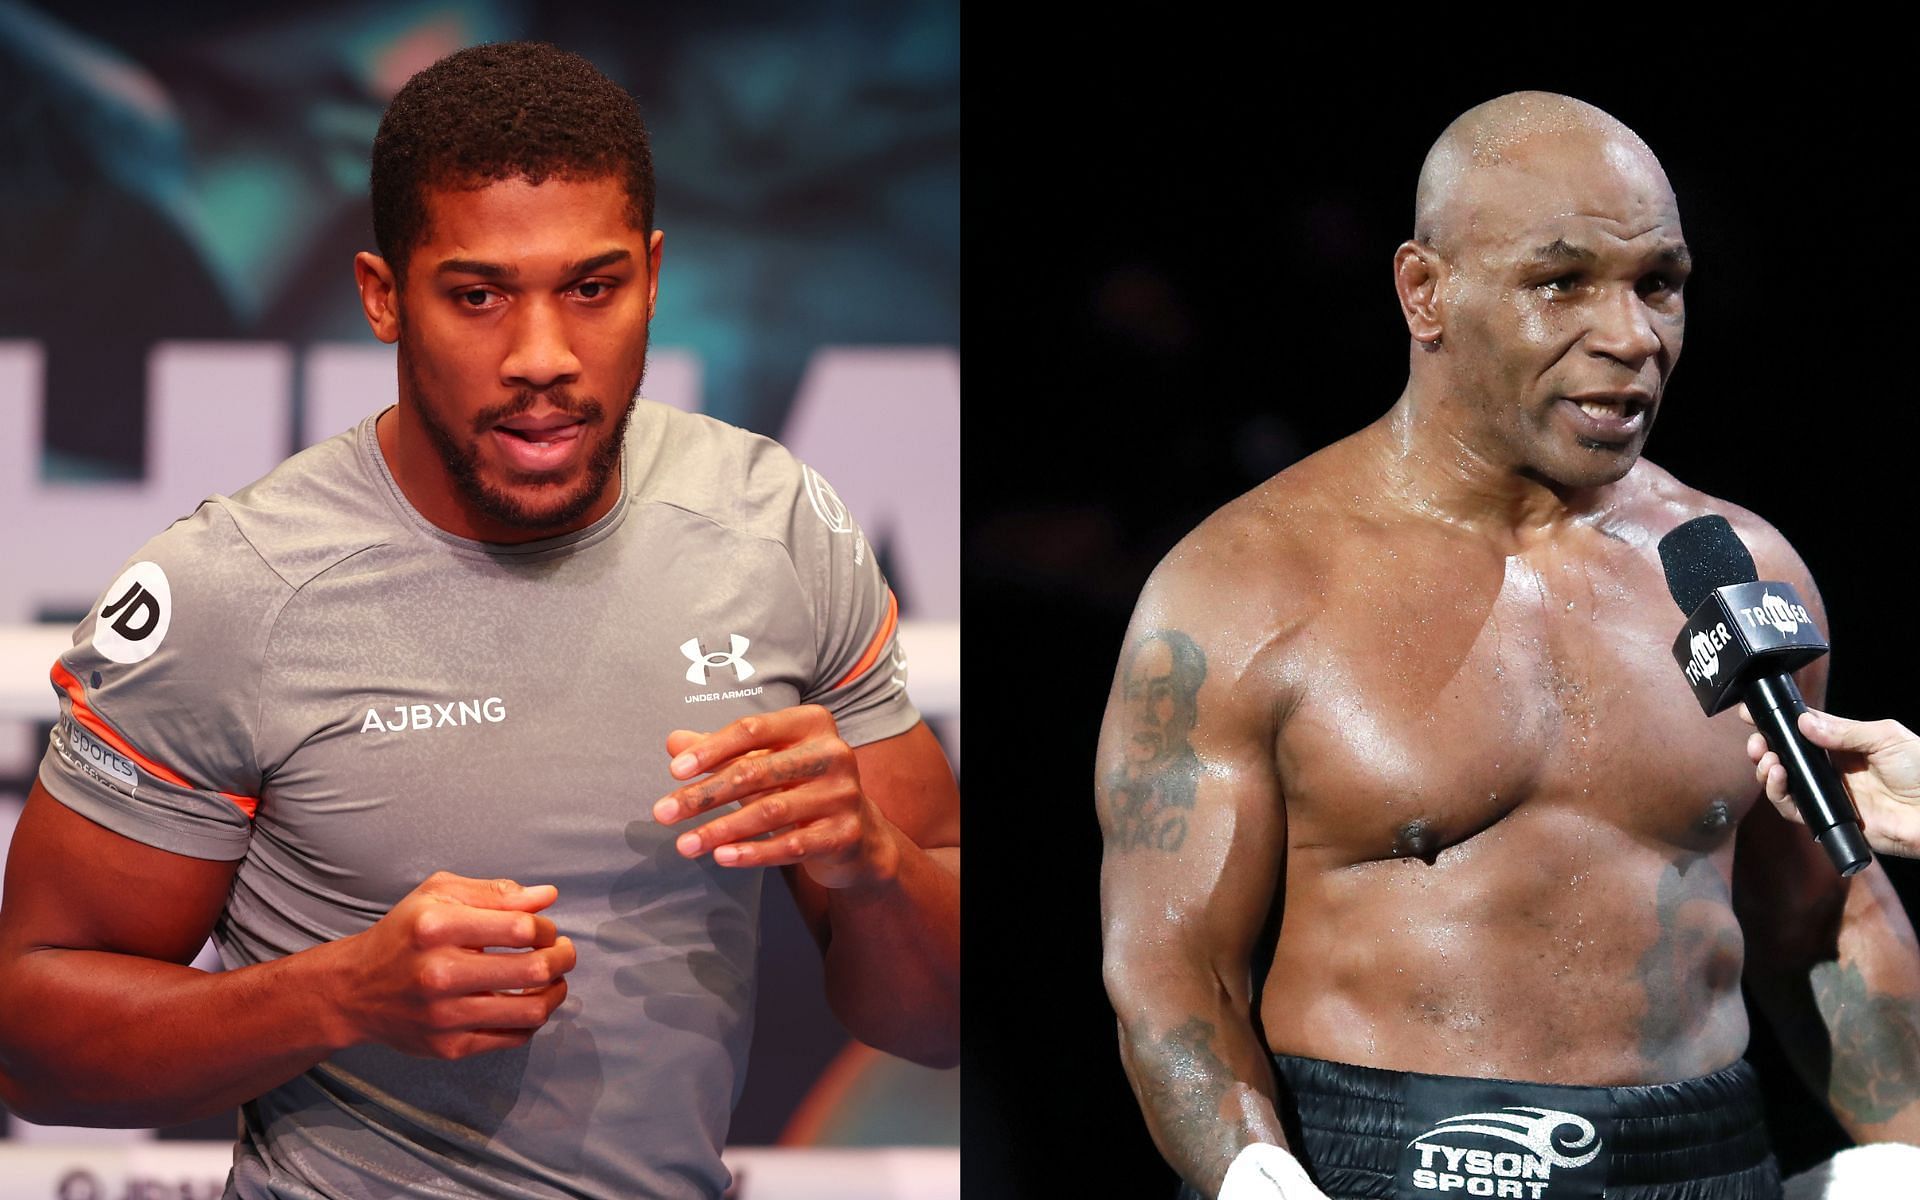 Anthony Joshua (left) and Mike Tyson (right) (Image credits Getty Images)